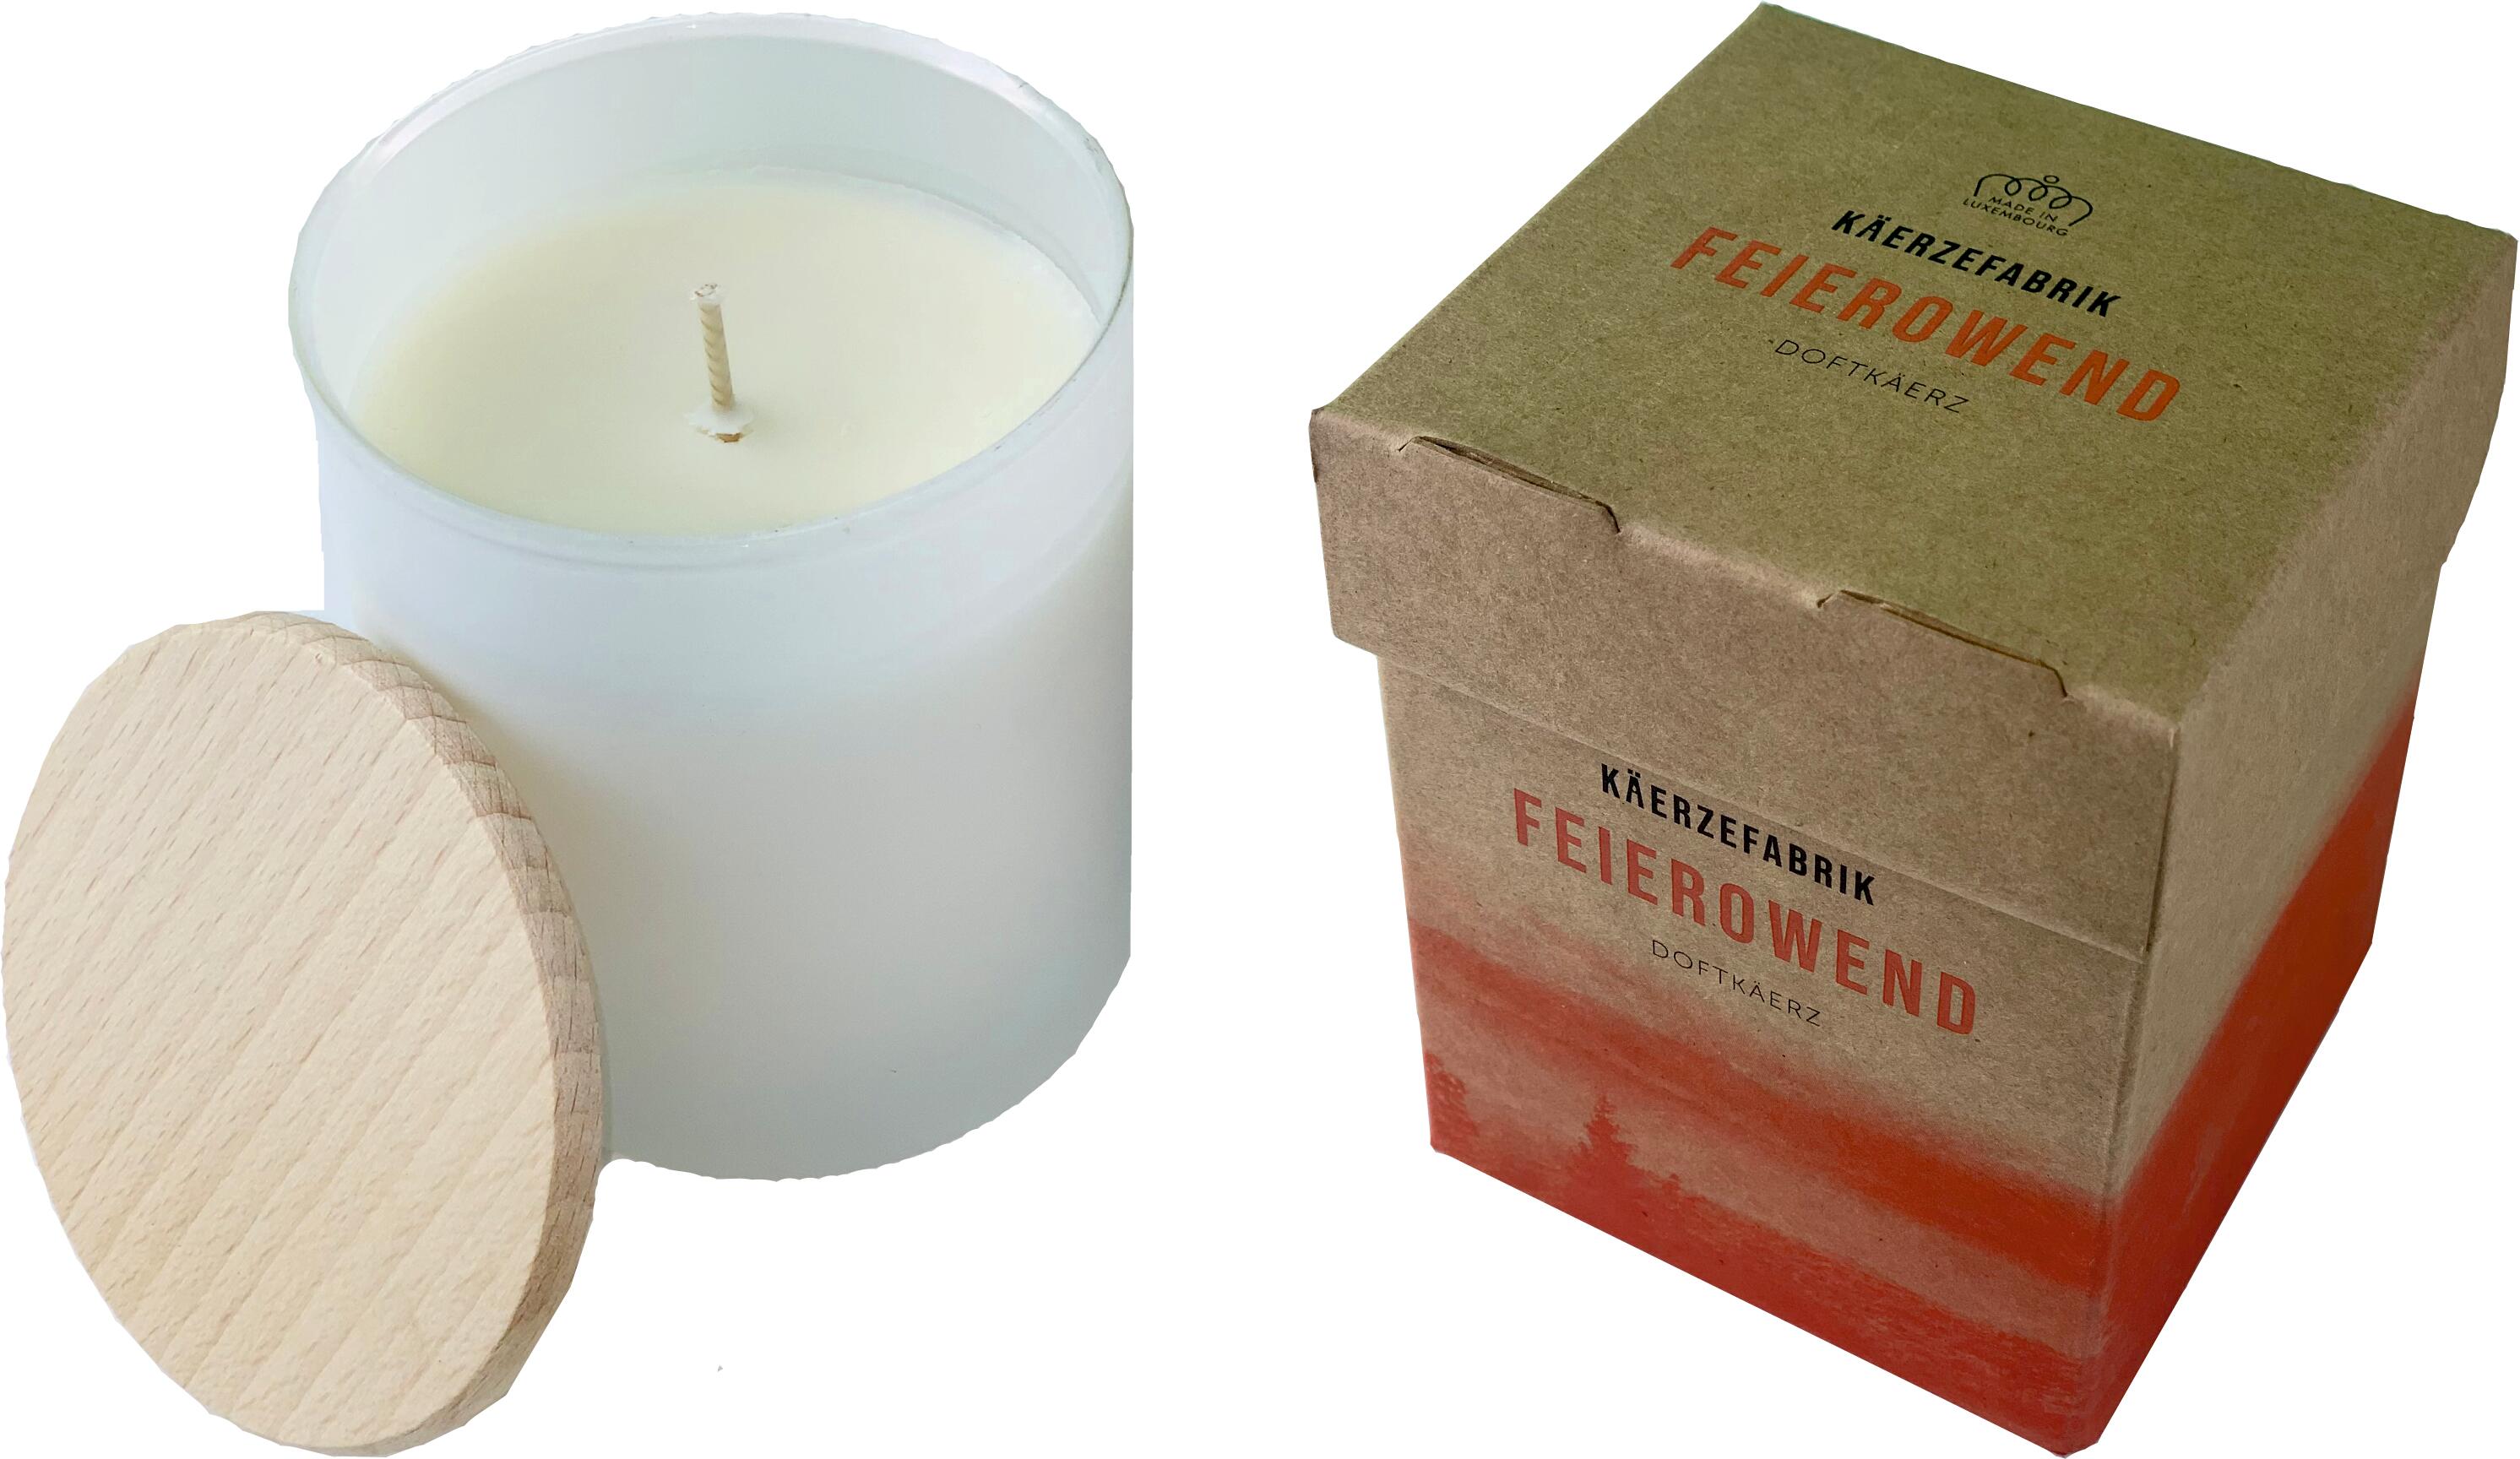 Scented candle "Feierowend